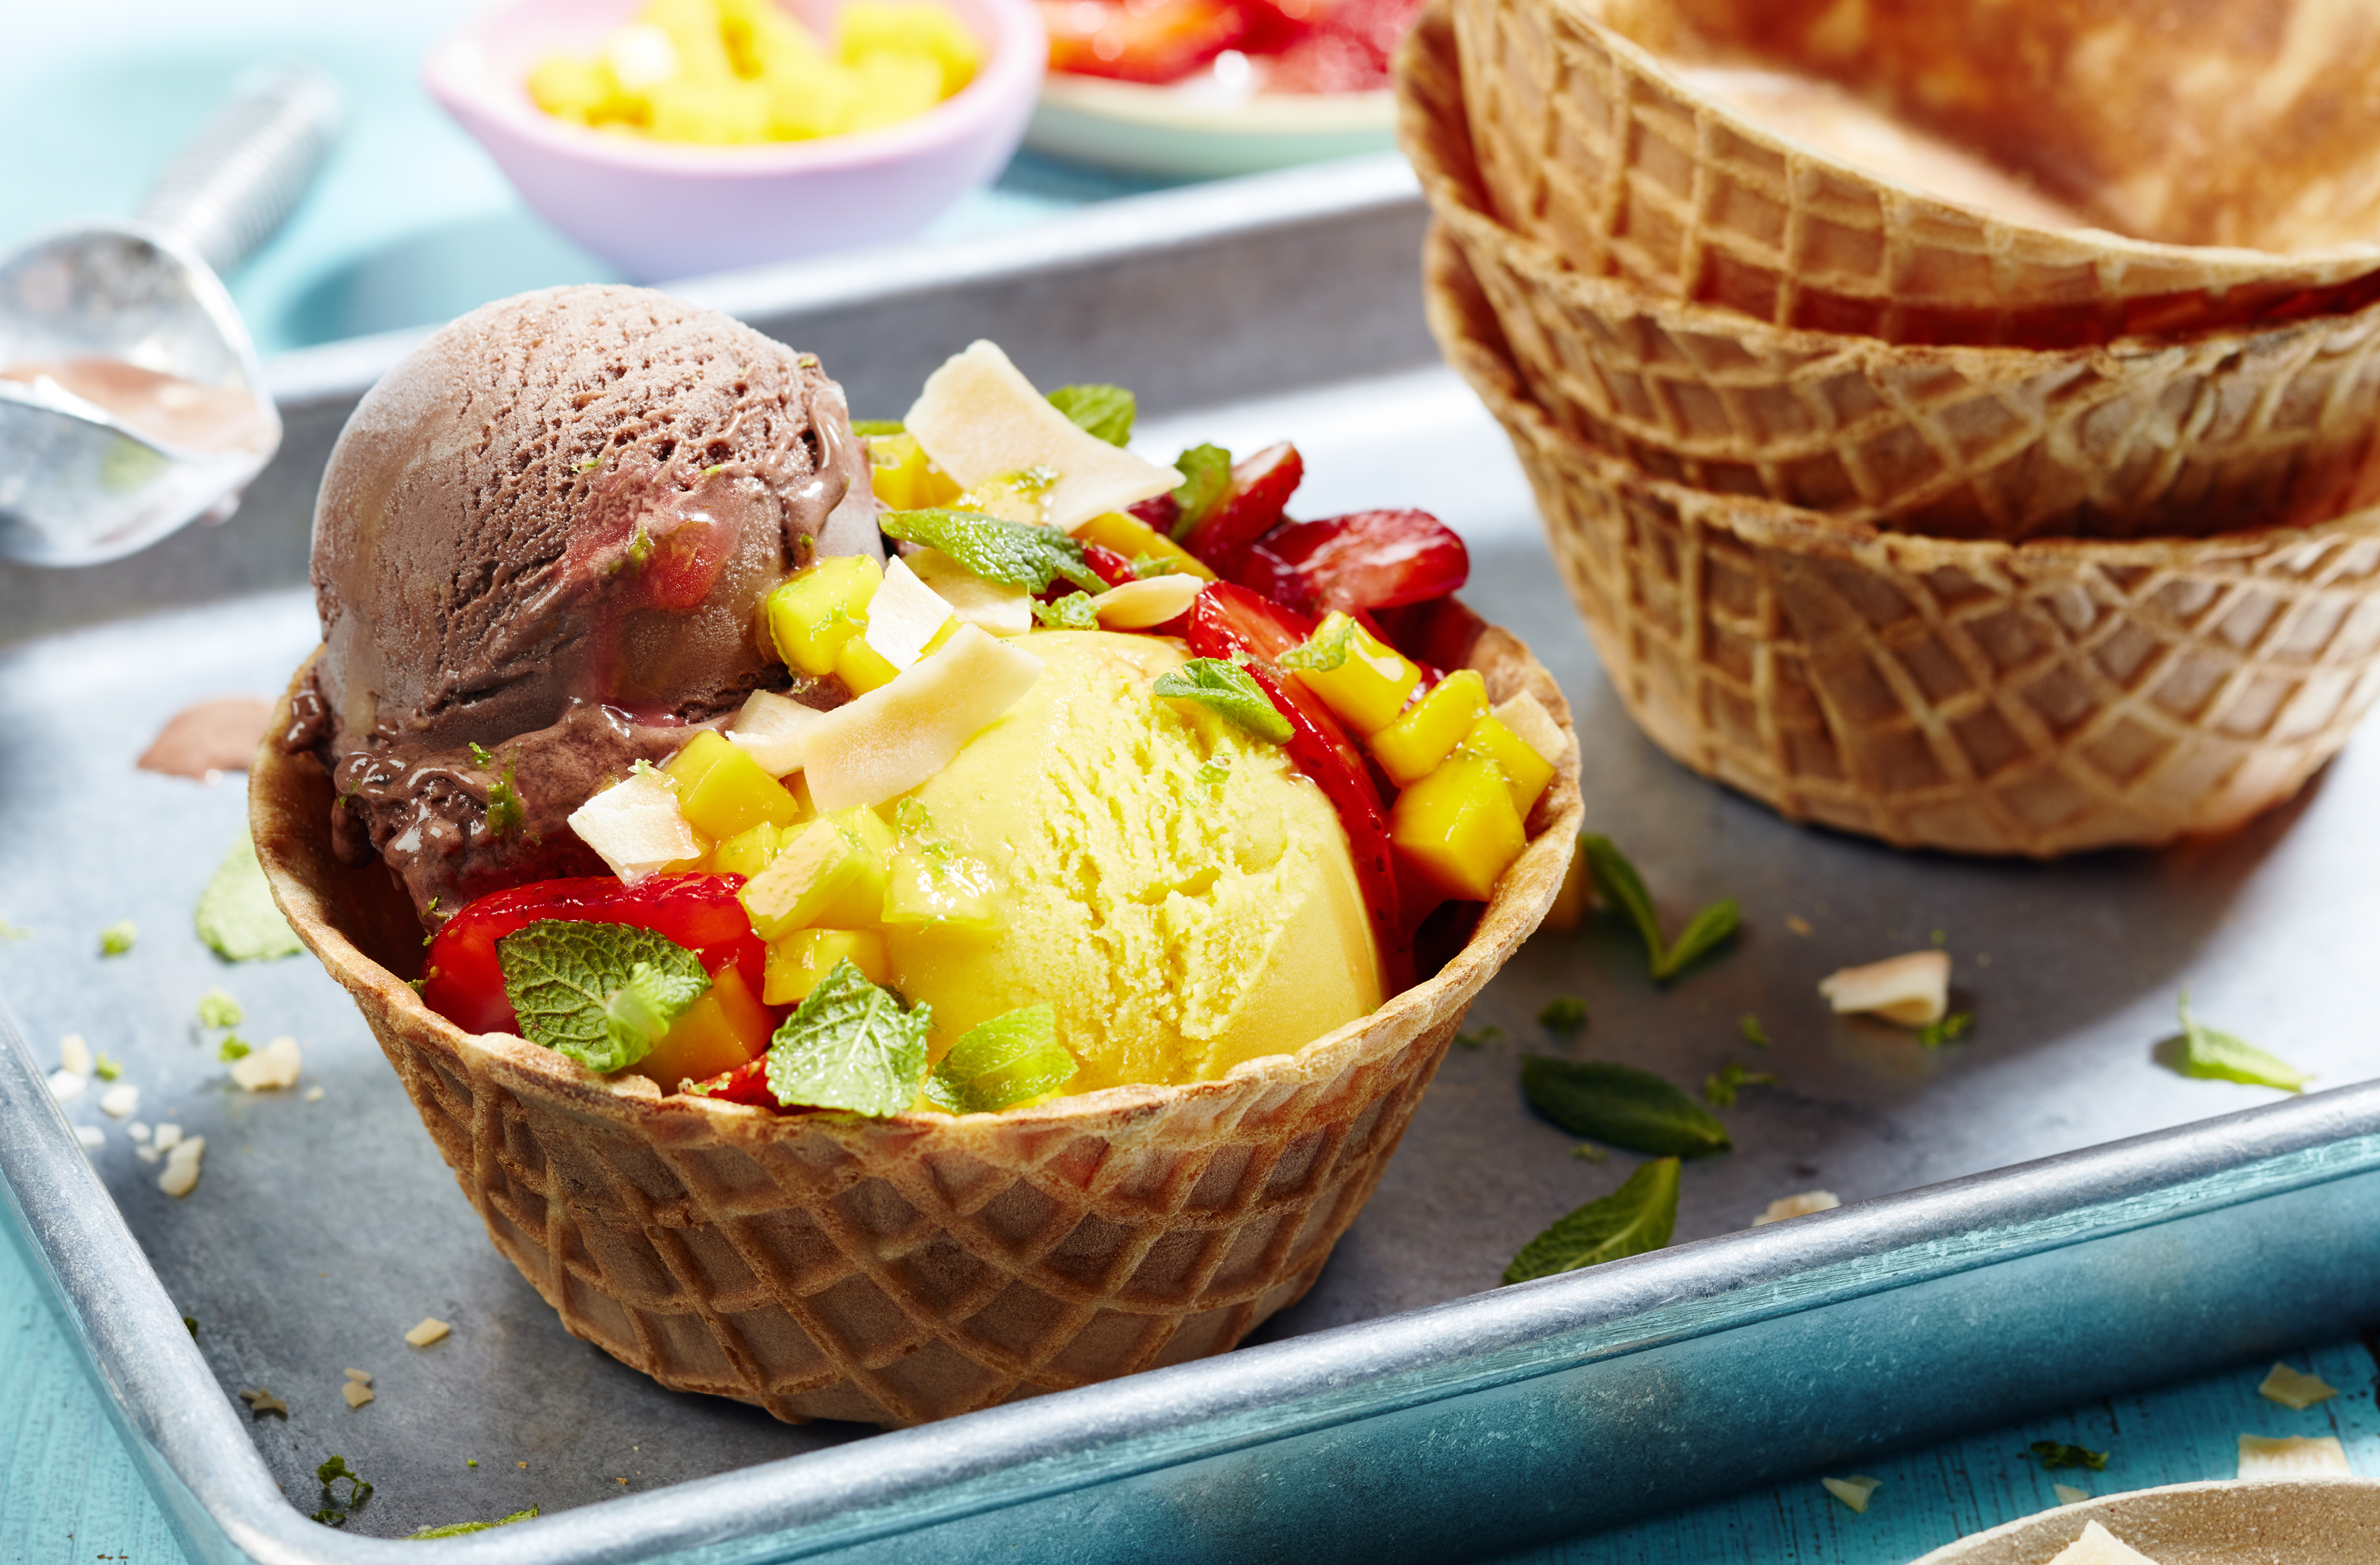 Dairy-Free chocolate and mango sundaes topped with chunks of mangoes, slices of strawberries and shavings of toasted coconuts. Mint leaves sprinkled on top. Served in waffle bowl